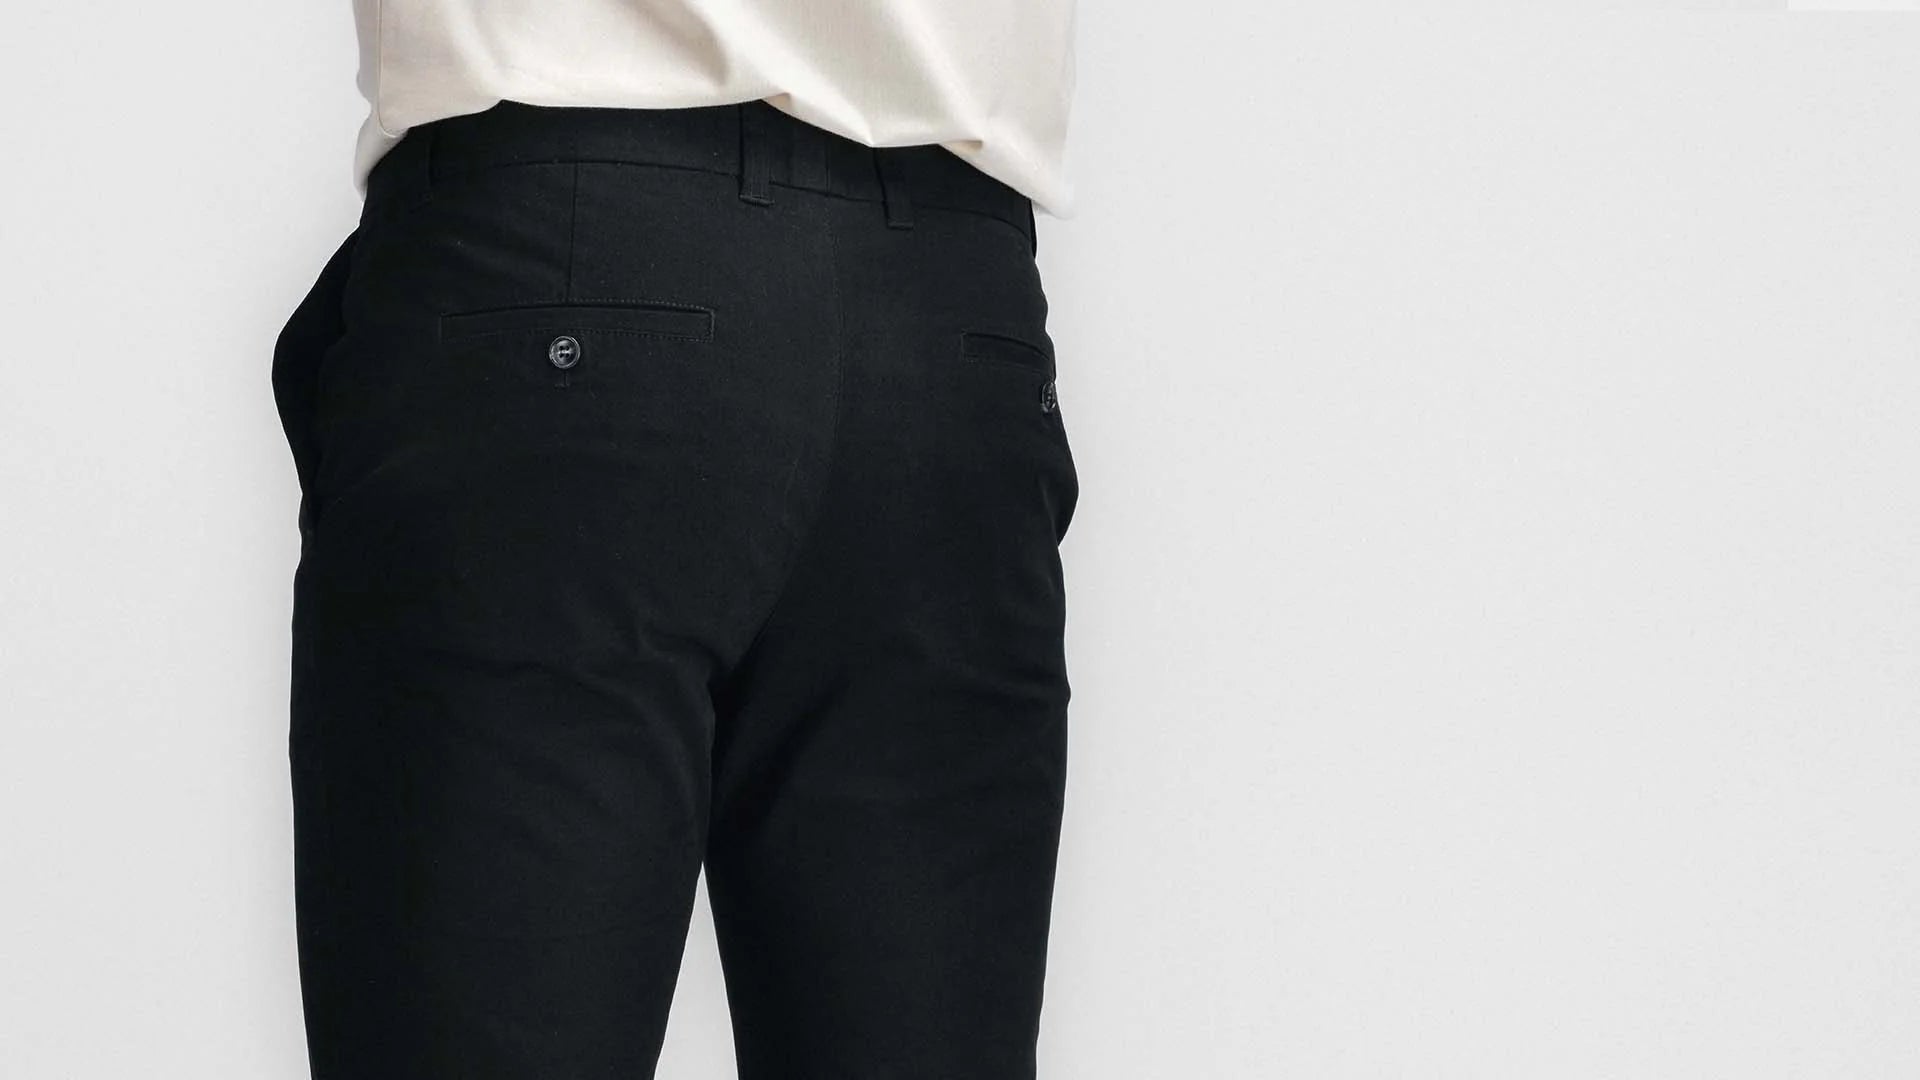 Pants designed especially for tall men - We guarantee a good fit